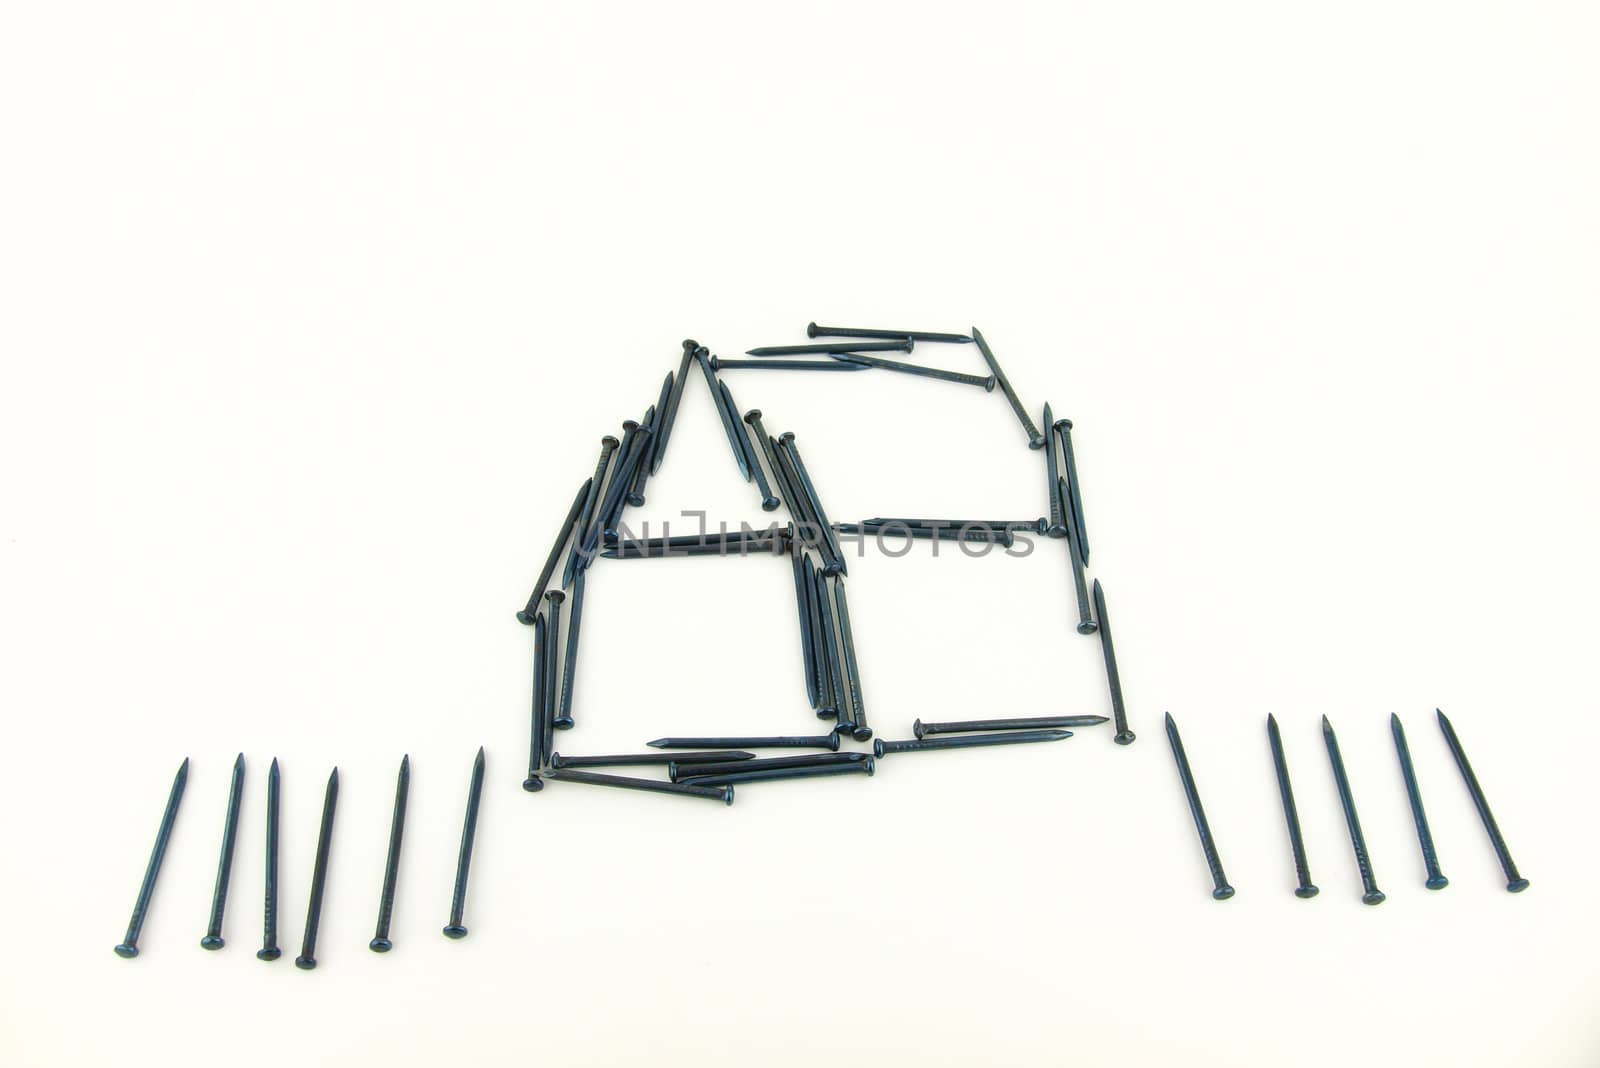 steel nails construct house with fence  by jakgree